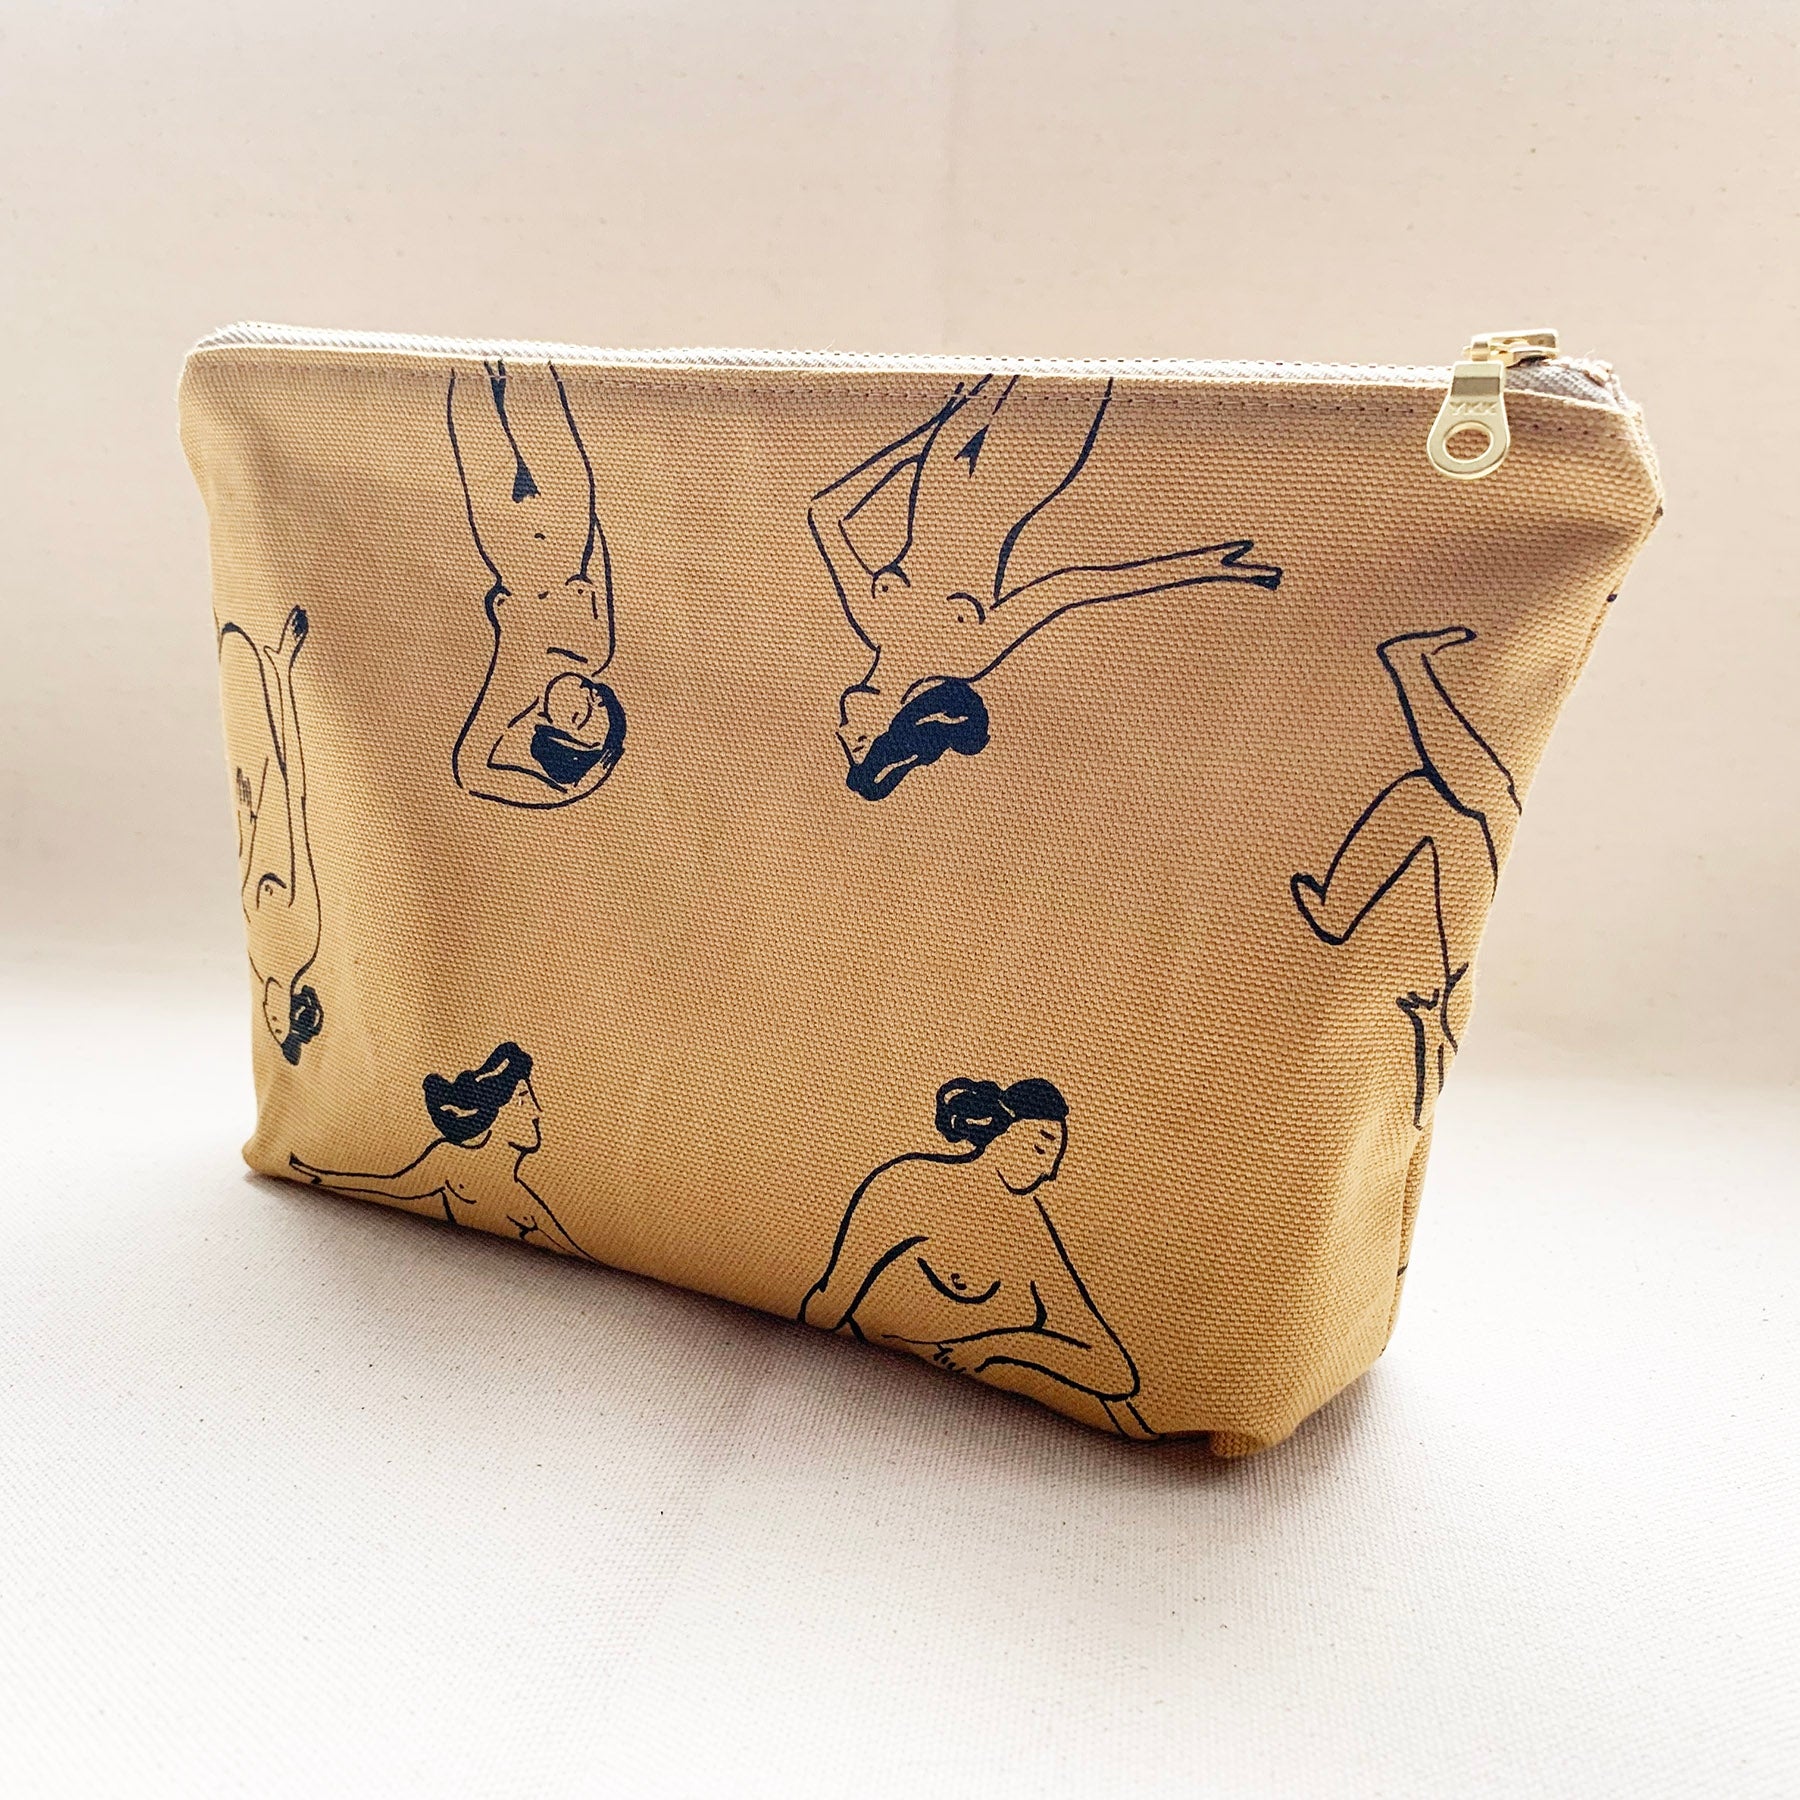 Naked Ladies Pouch: Tan & Black